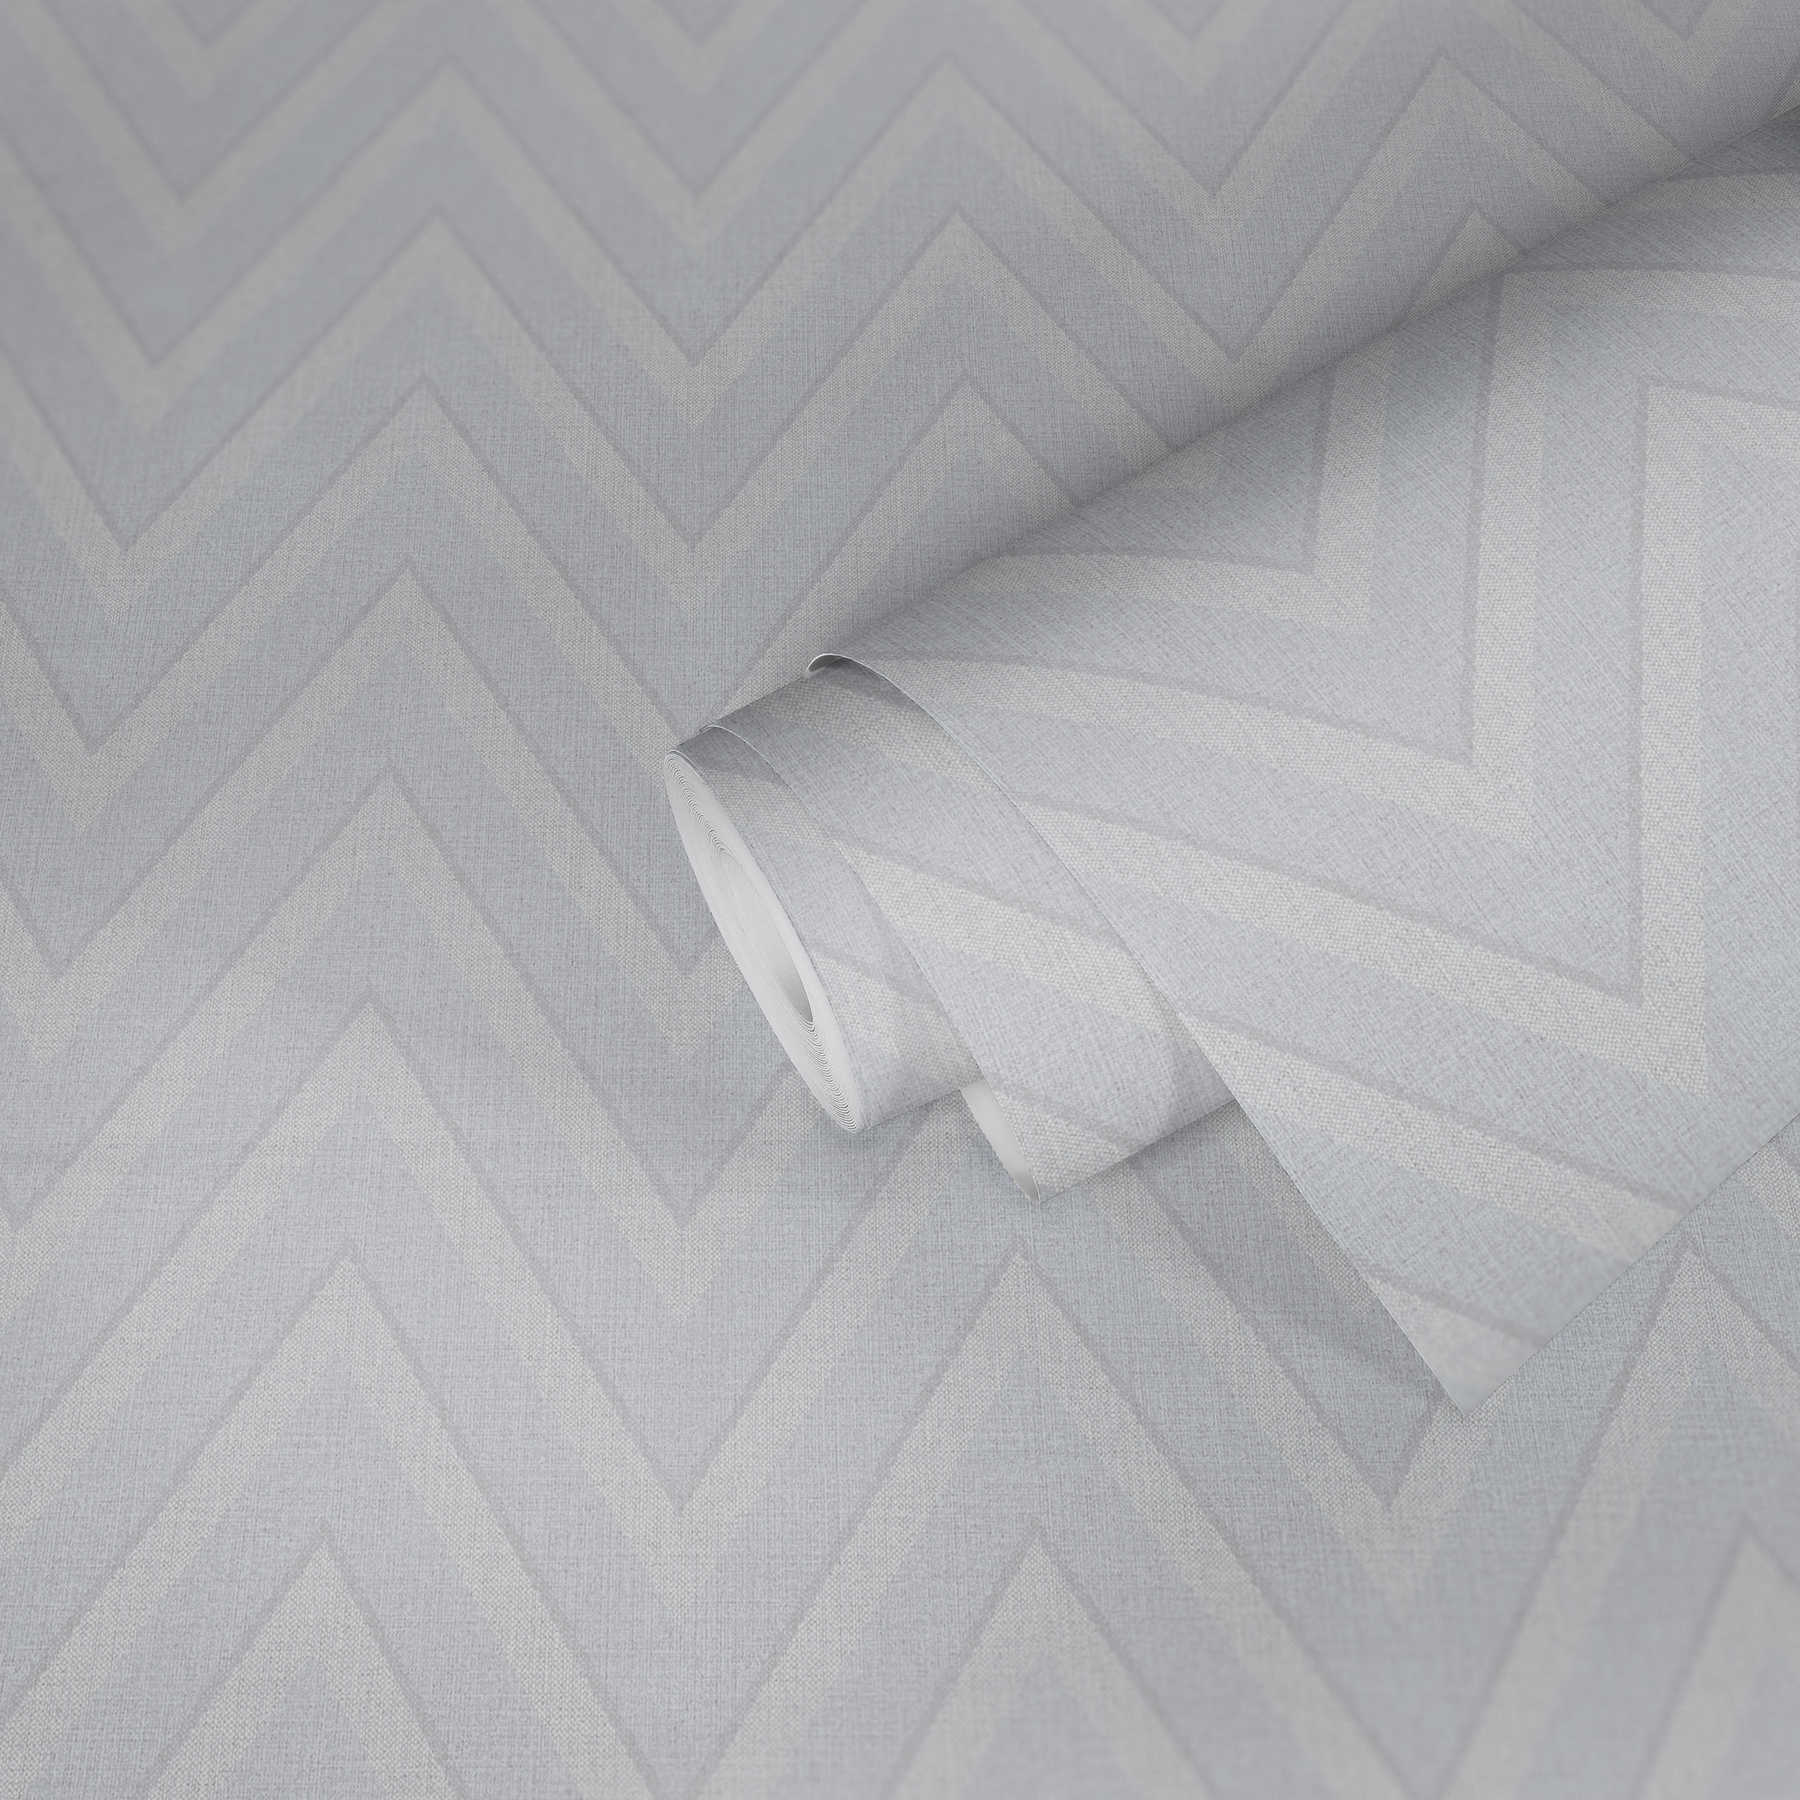             Striped wallpaper with zigzag pattern - grey
        